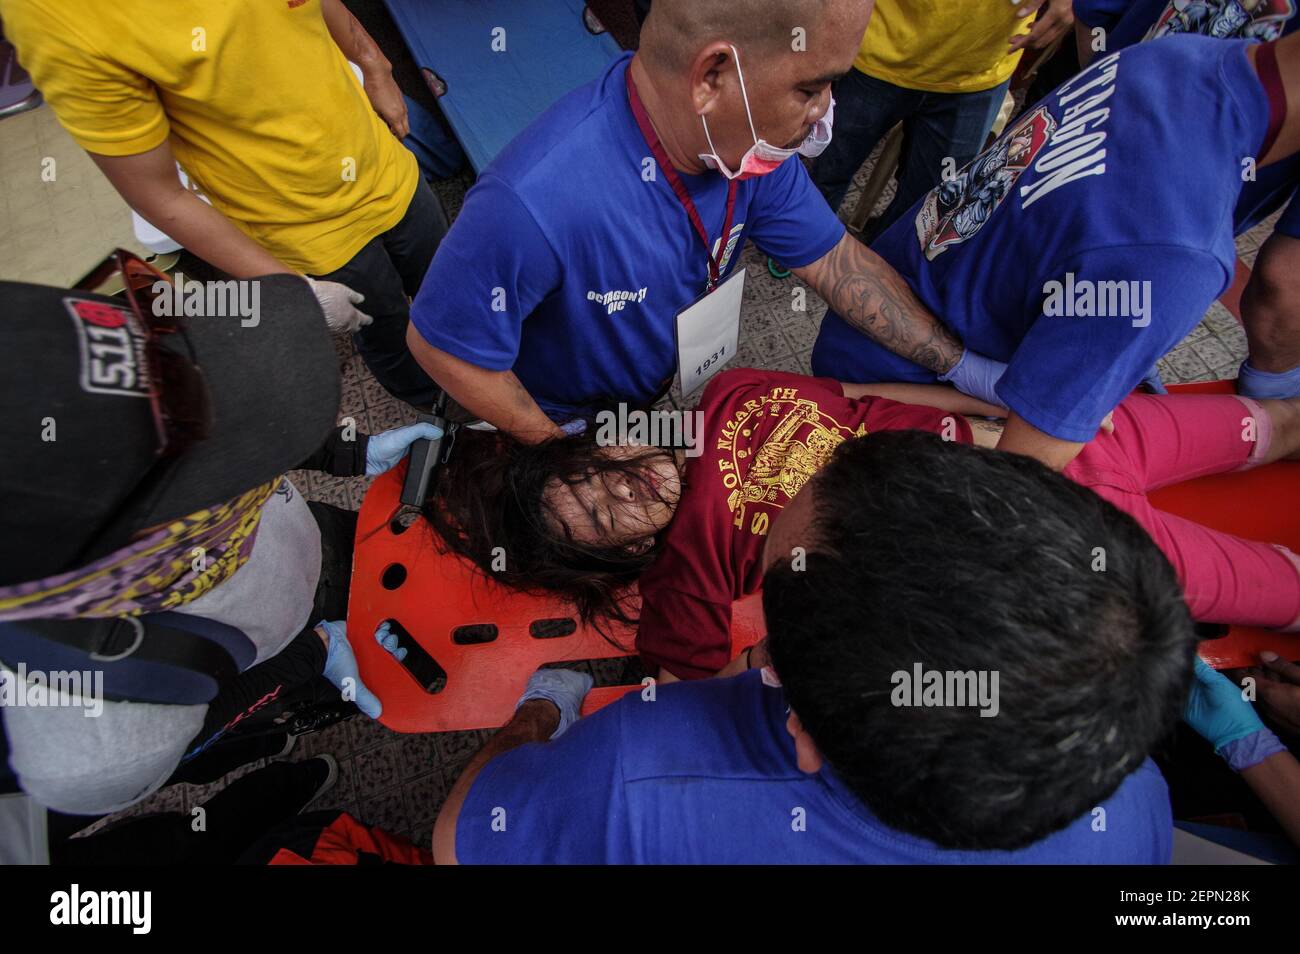 A devotee fainted during the procession is rushed to the nearest first aid station in Carriedo in Manila, Philippines. Millions of devotees attend the yearly Traslacion of the Black Nazarene on January 9, 2018. (Photo by Larry Monserate Piojo/Sipa USA) Stock Photo